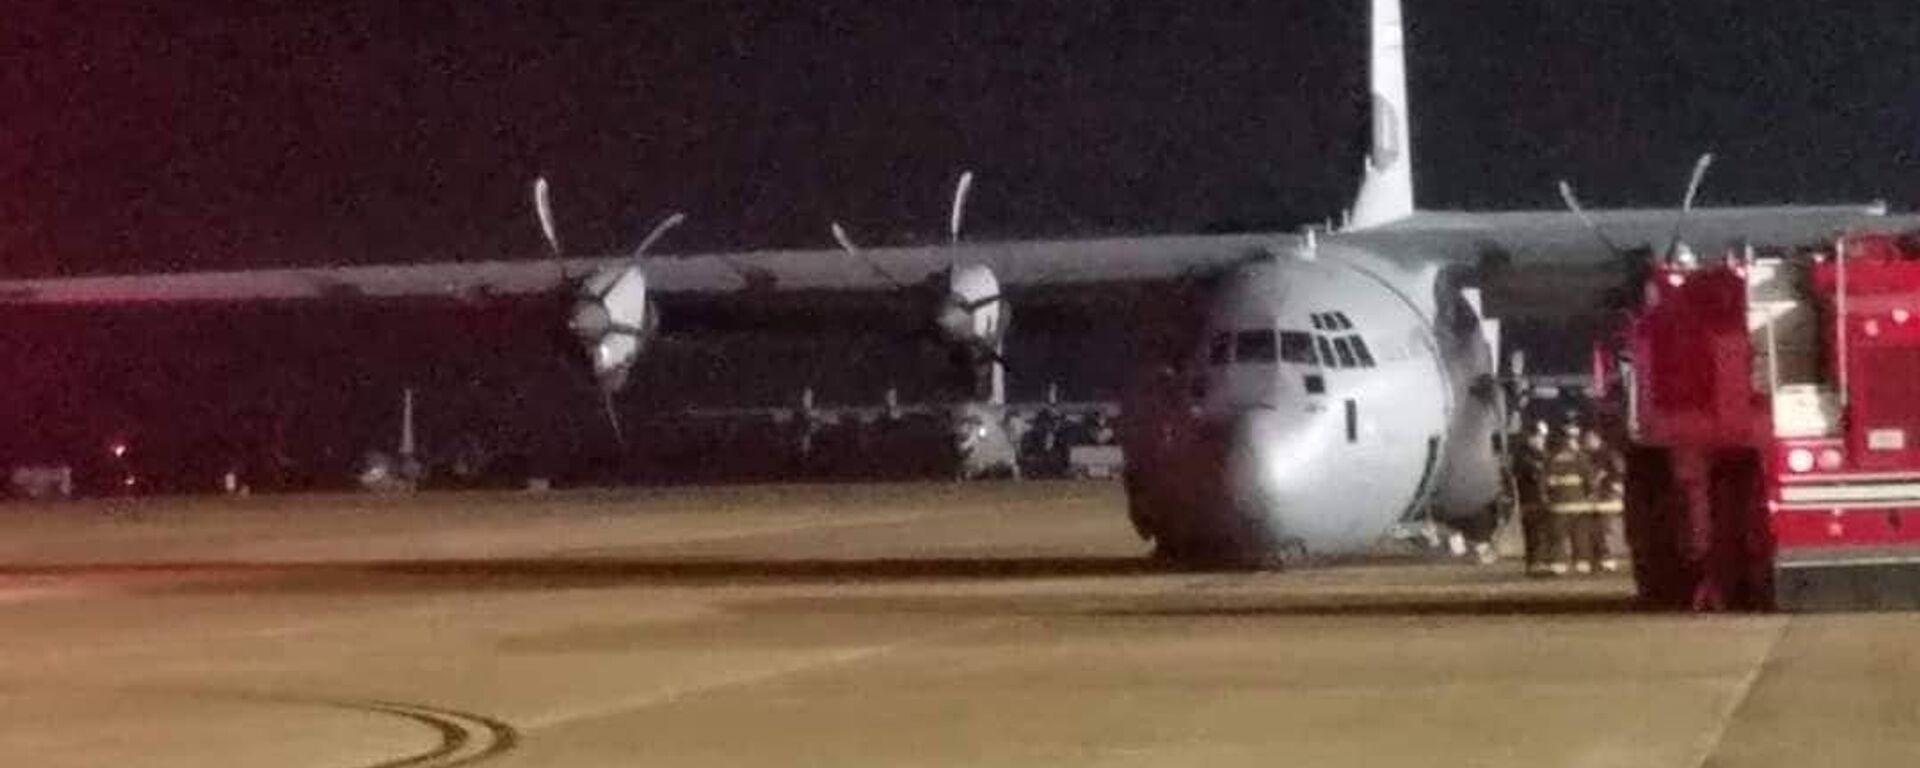 A C-130J Super Hercules with collapsed nose gear on the tarmac at Little Rock Air Force Base - Sputnik International, 1920, 31.10.2019